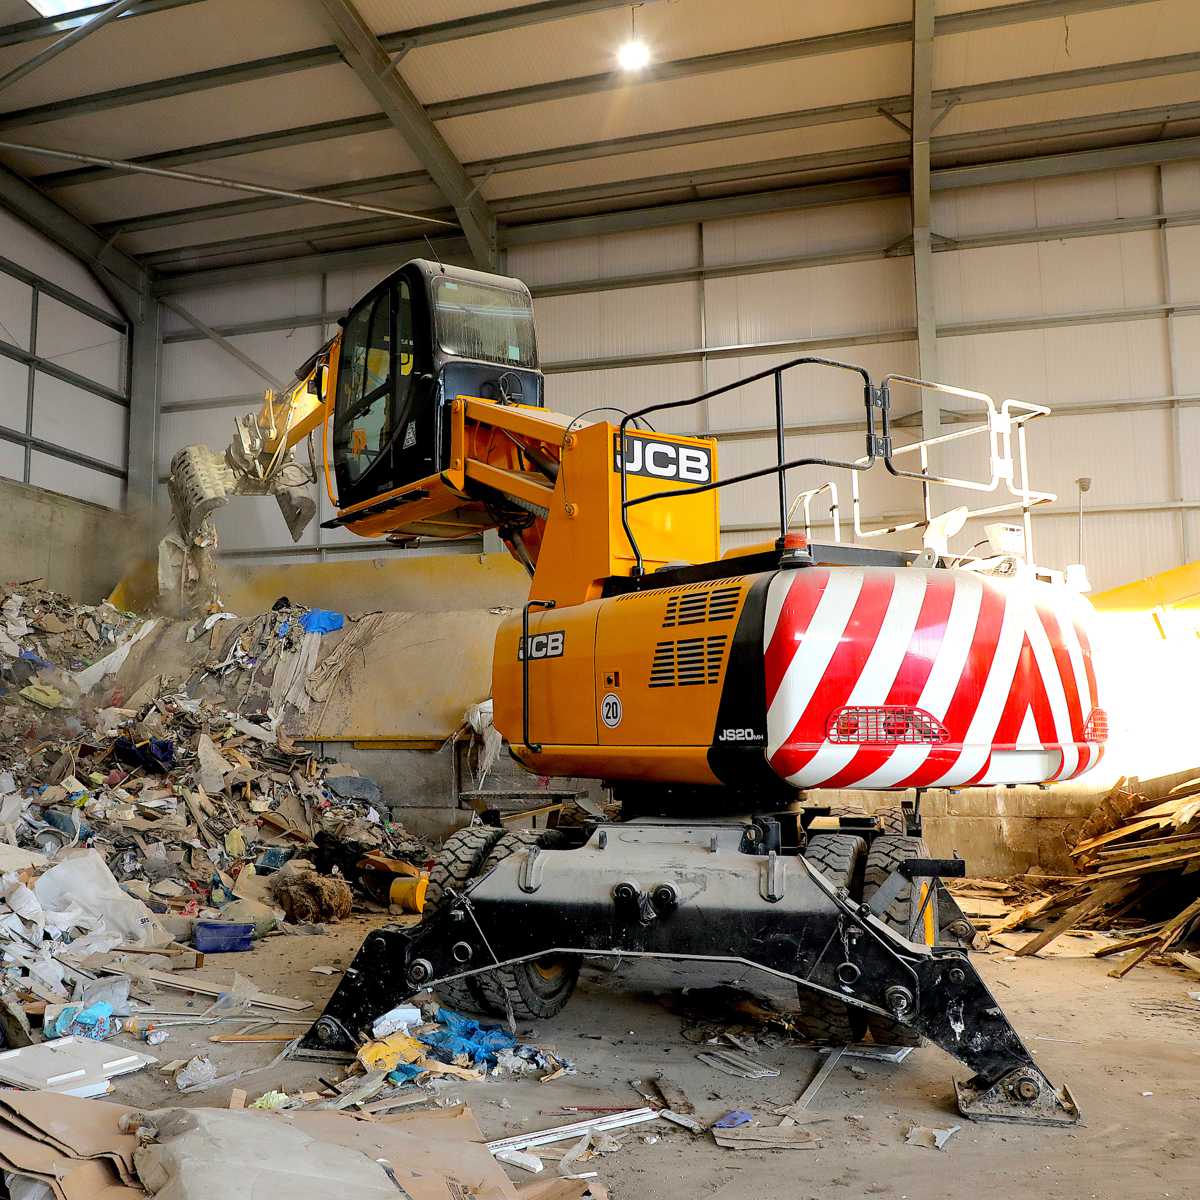 WRC grabs new JCB JS20MH Materials Handler for new Recycling Facility